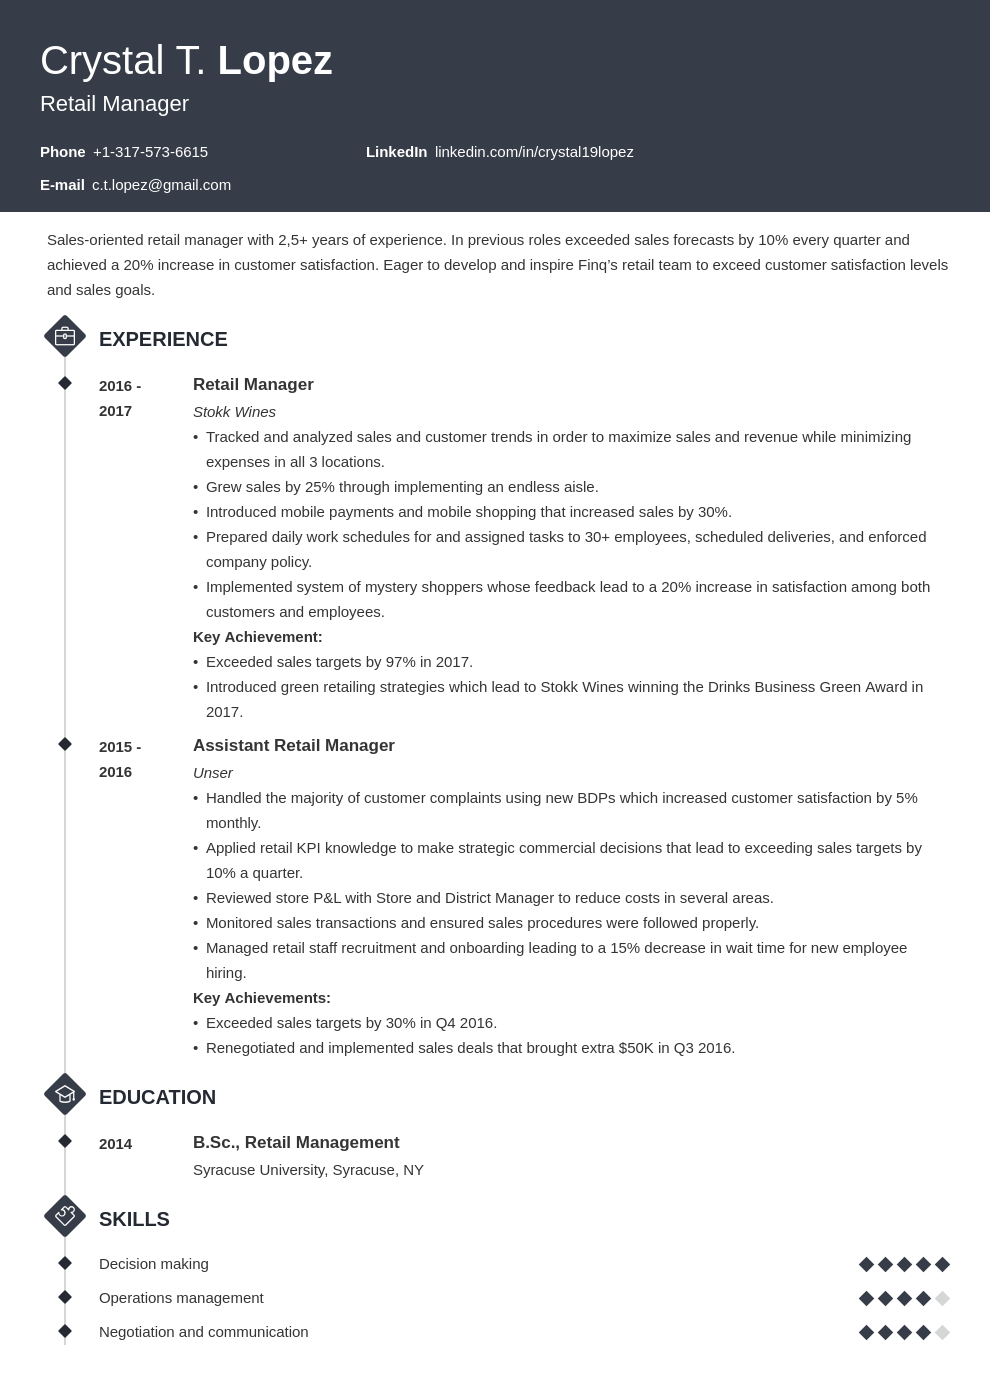 Retail Manager Resume Examples with Skills Objectives 